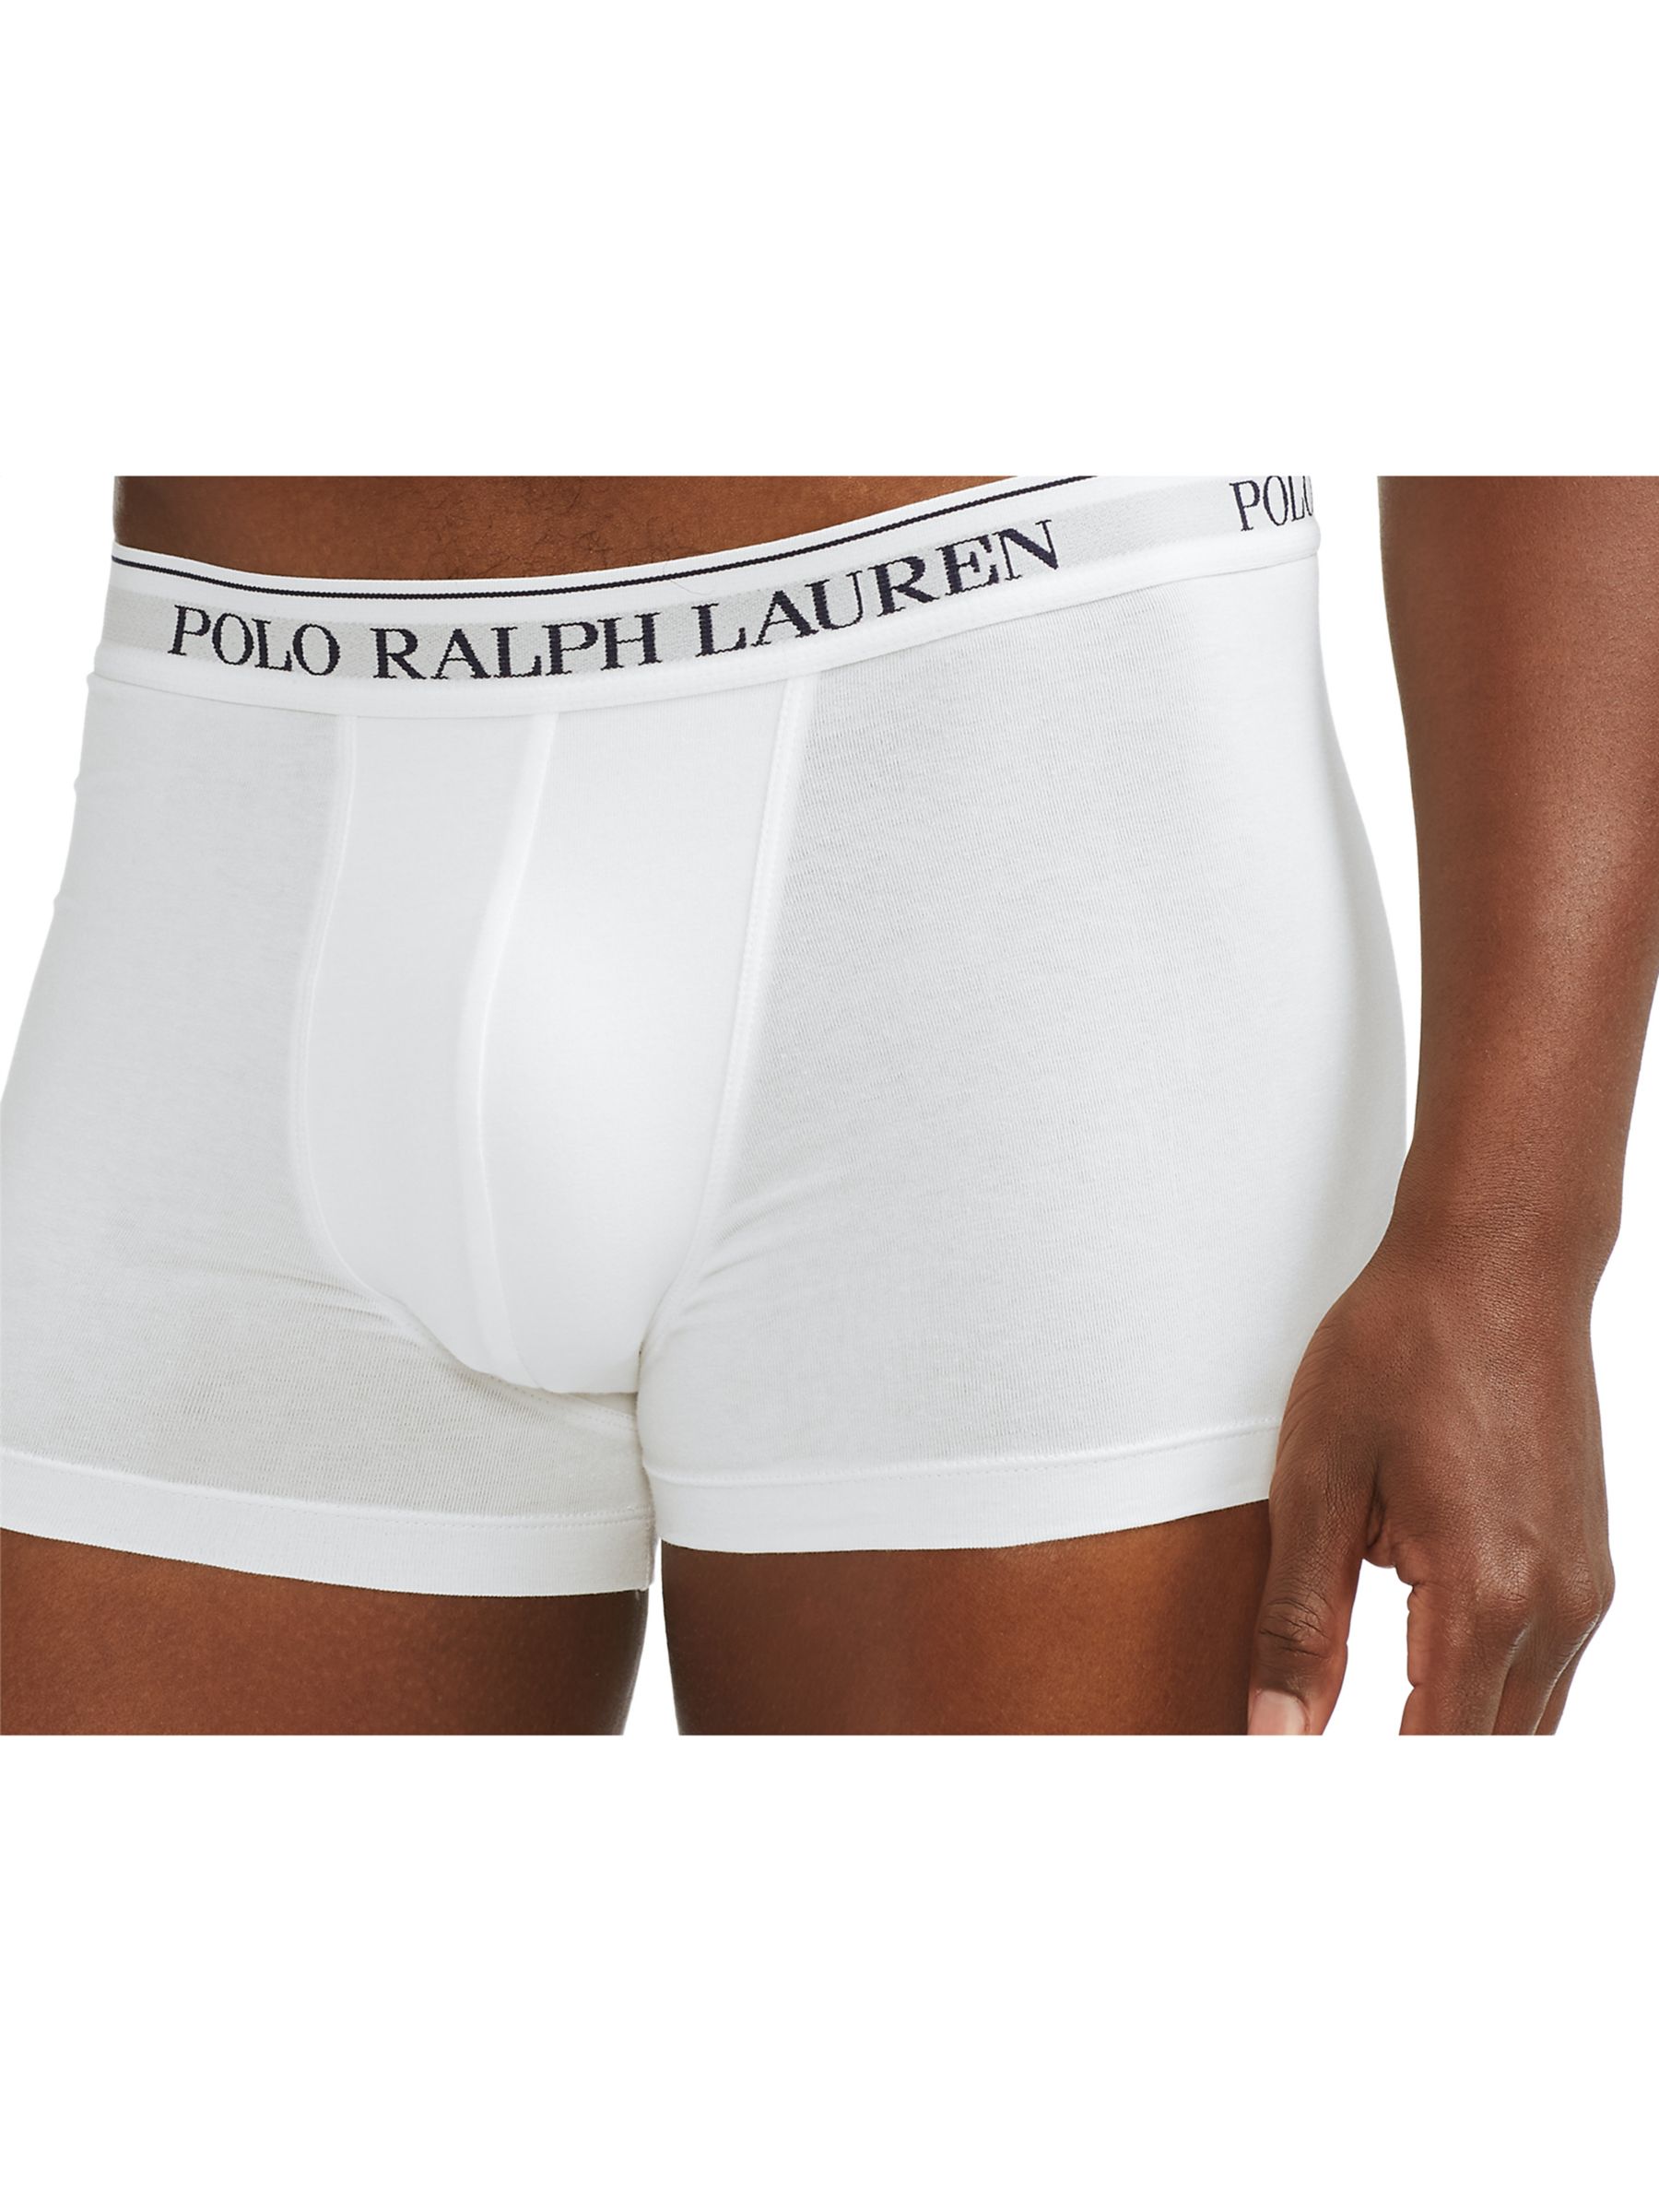 Polo Ralph Lauren Cotton Trunks, Pack of 3, White at John Lewis & Partners